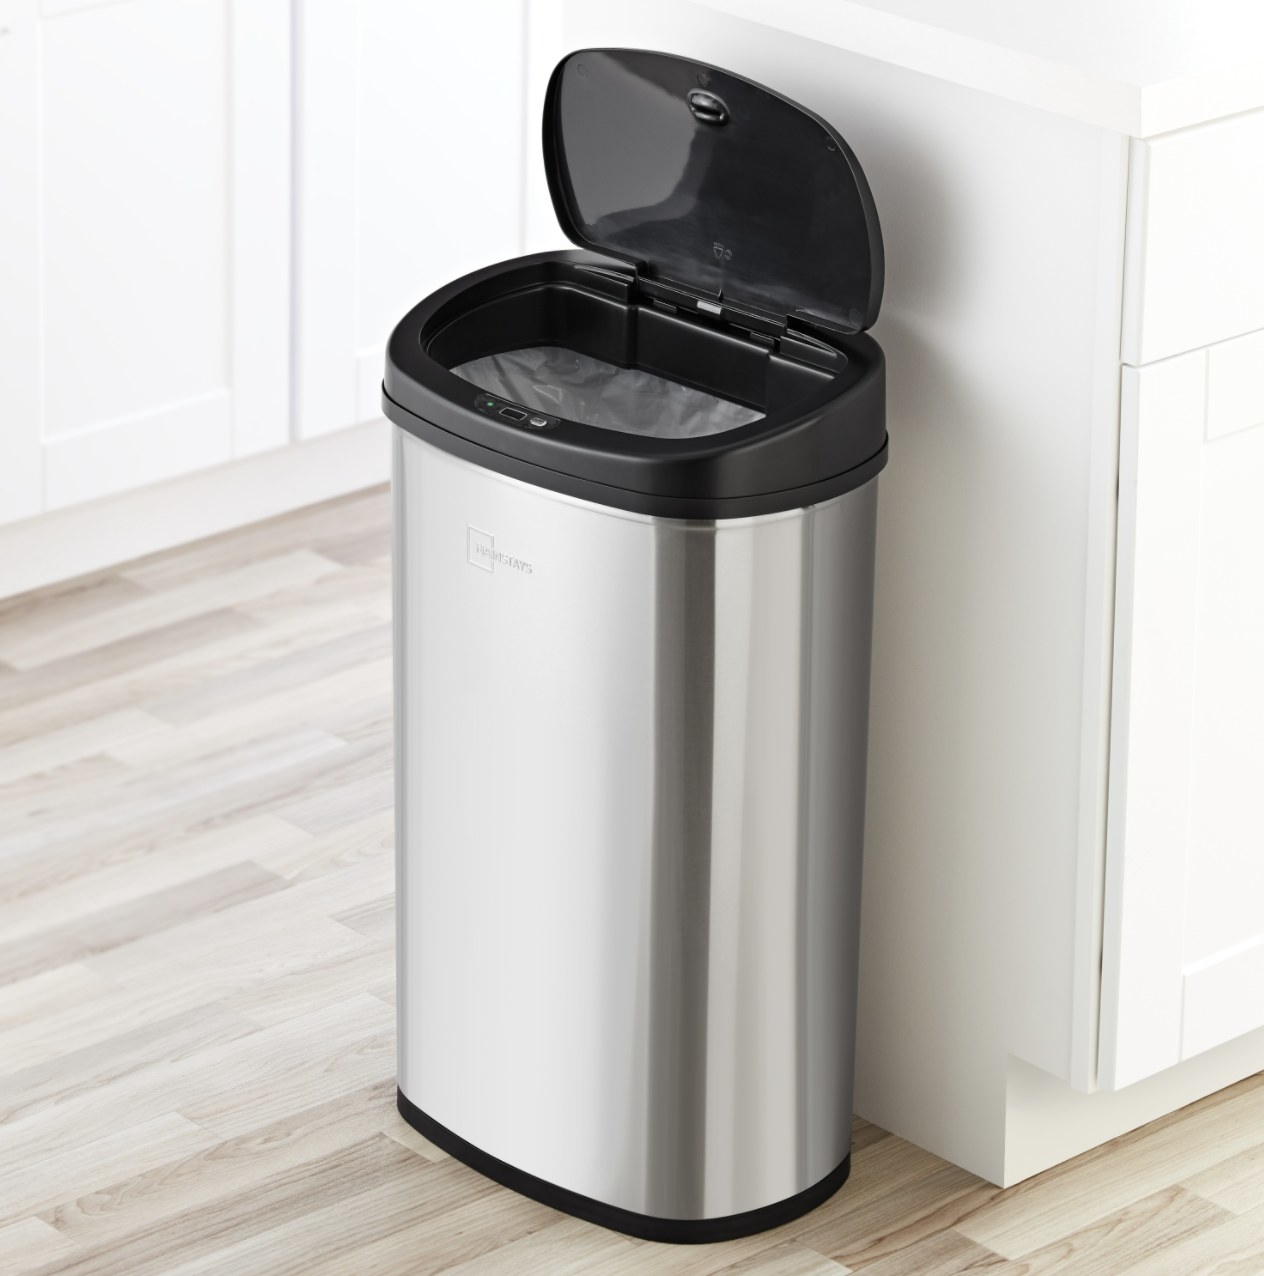 The silver trash can has the black lid in open position